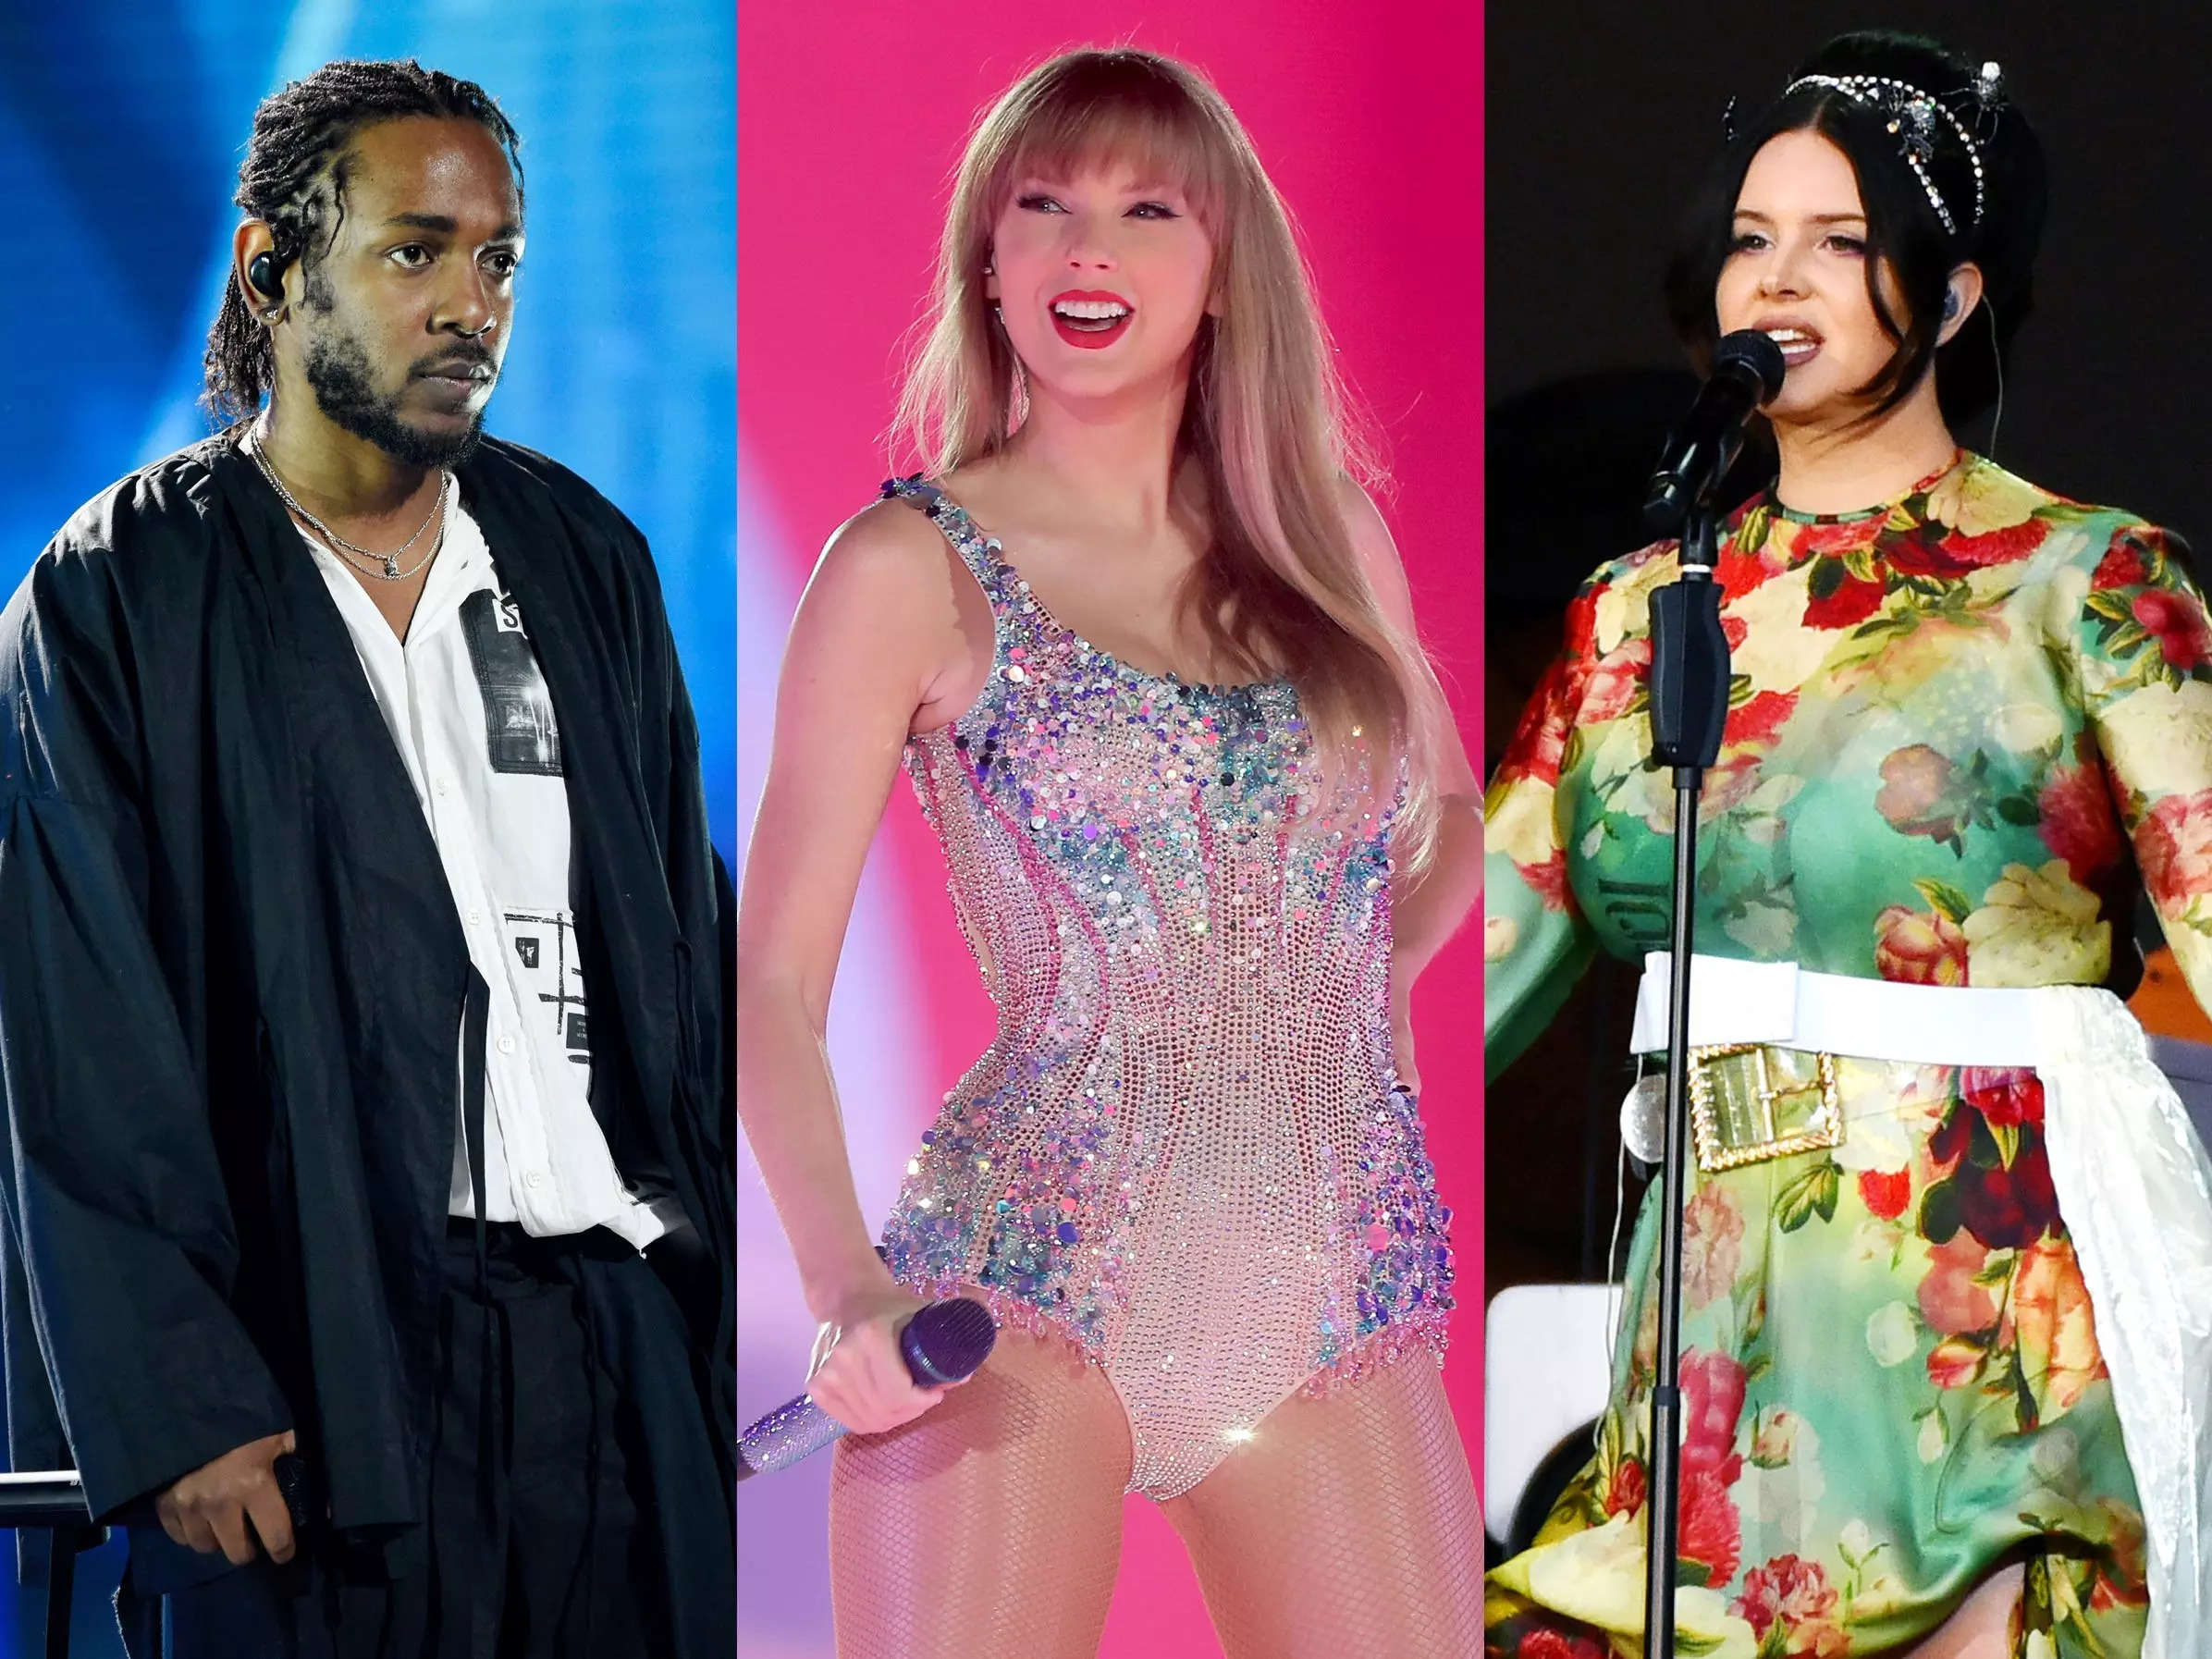 There are 23 artists who have been featured on a Taylor Swift song